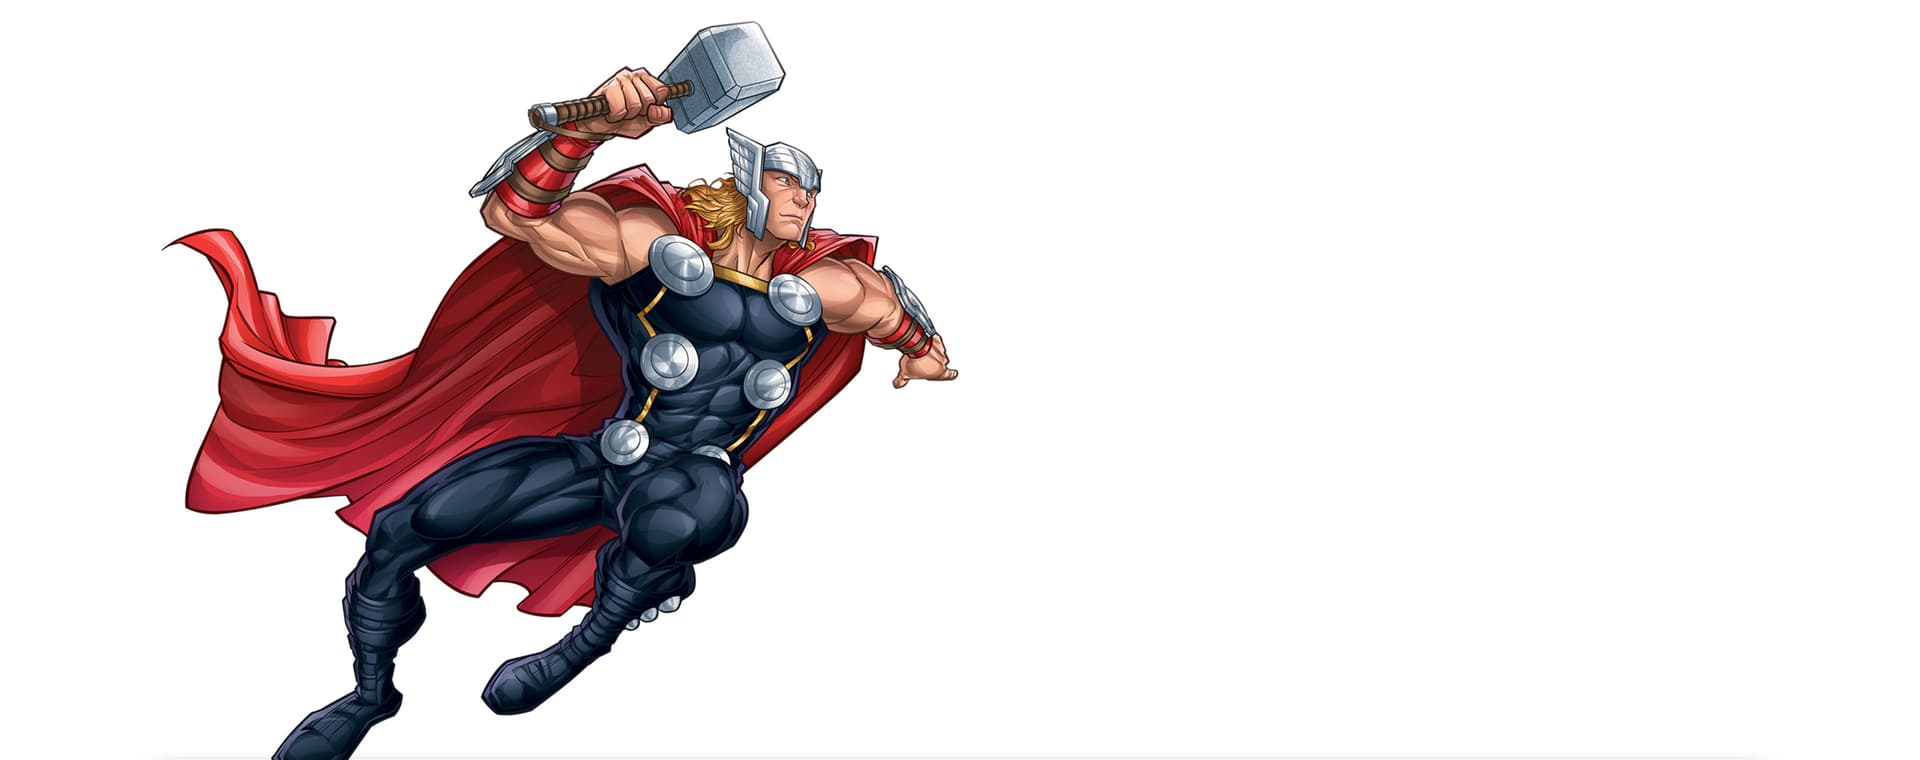 Download Join Thor on His Epic Journey! Wallpaper | Wallpapers.com